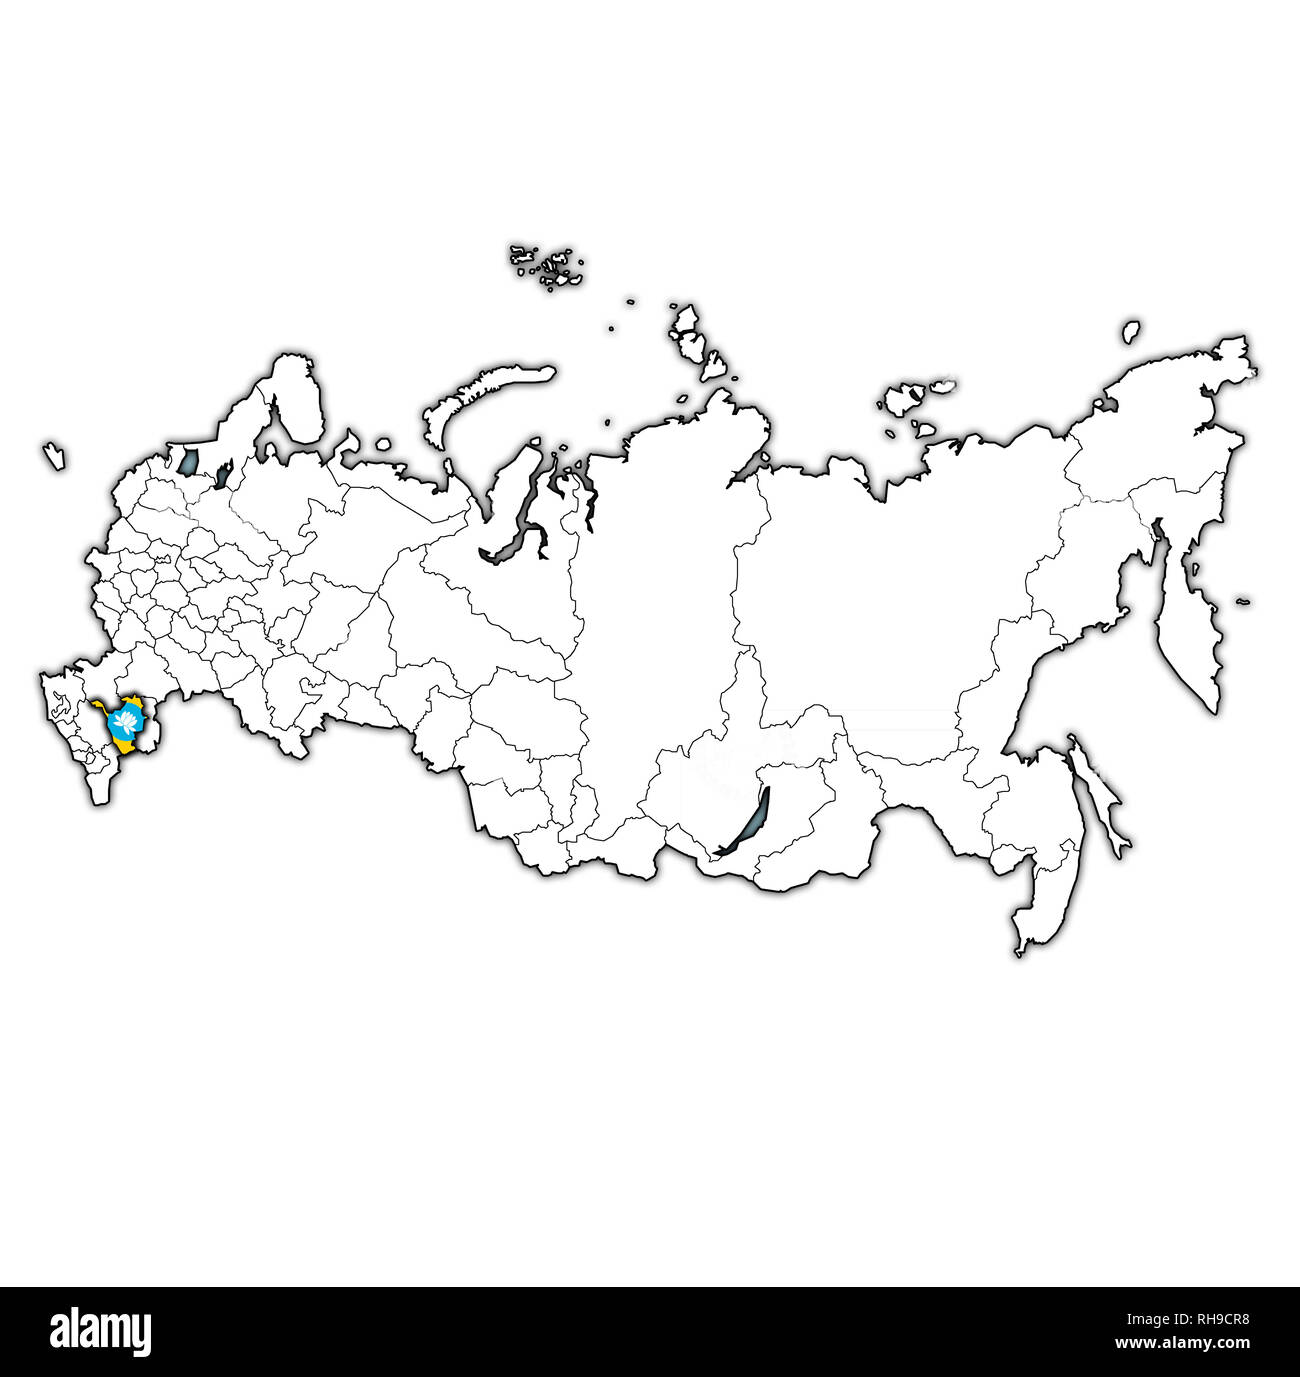 emblem of Kalmykia on map with administrative divisions and borders of russia Stock Photo